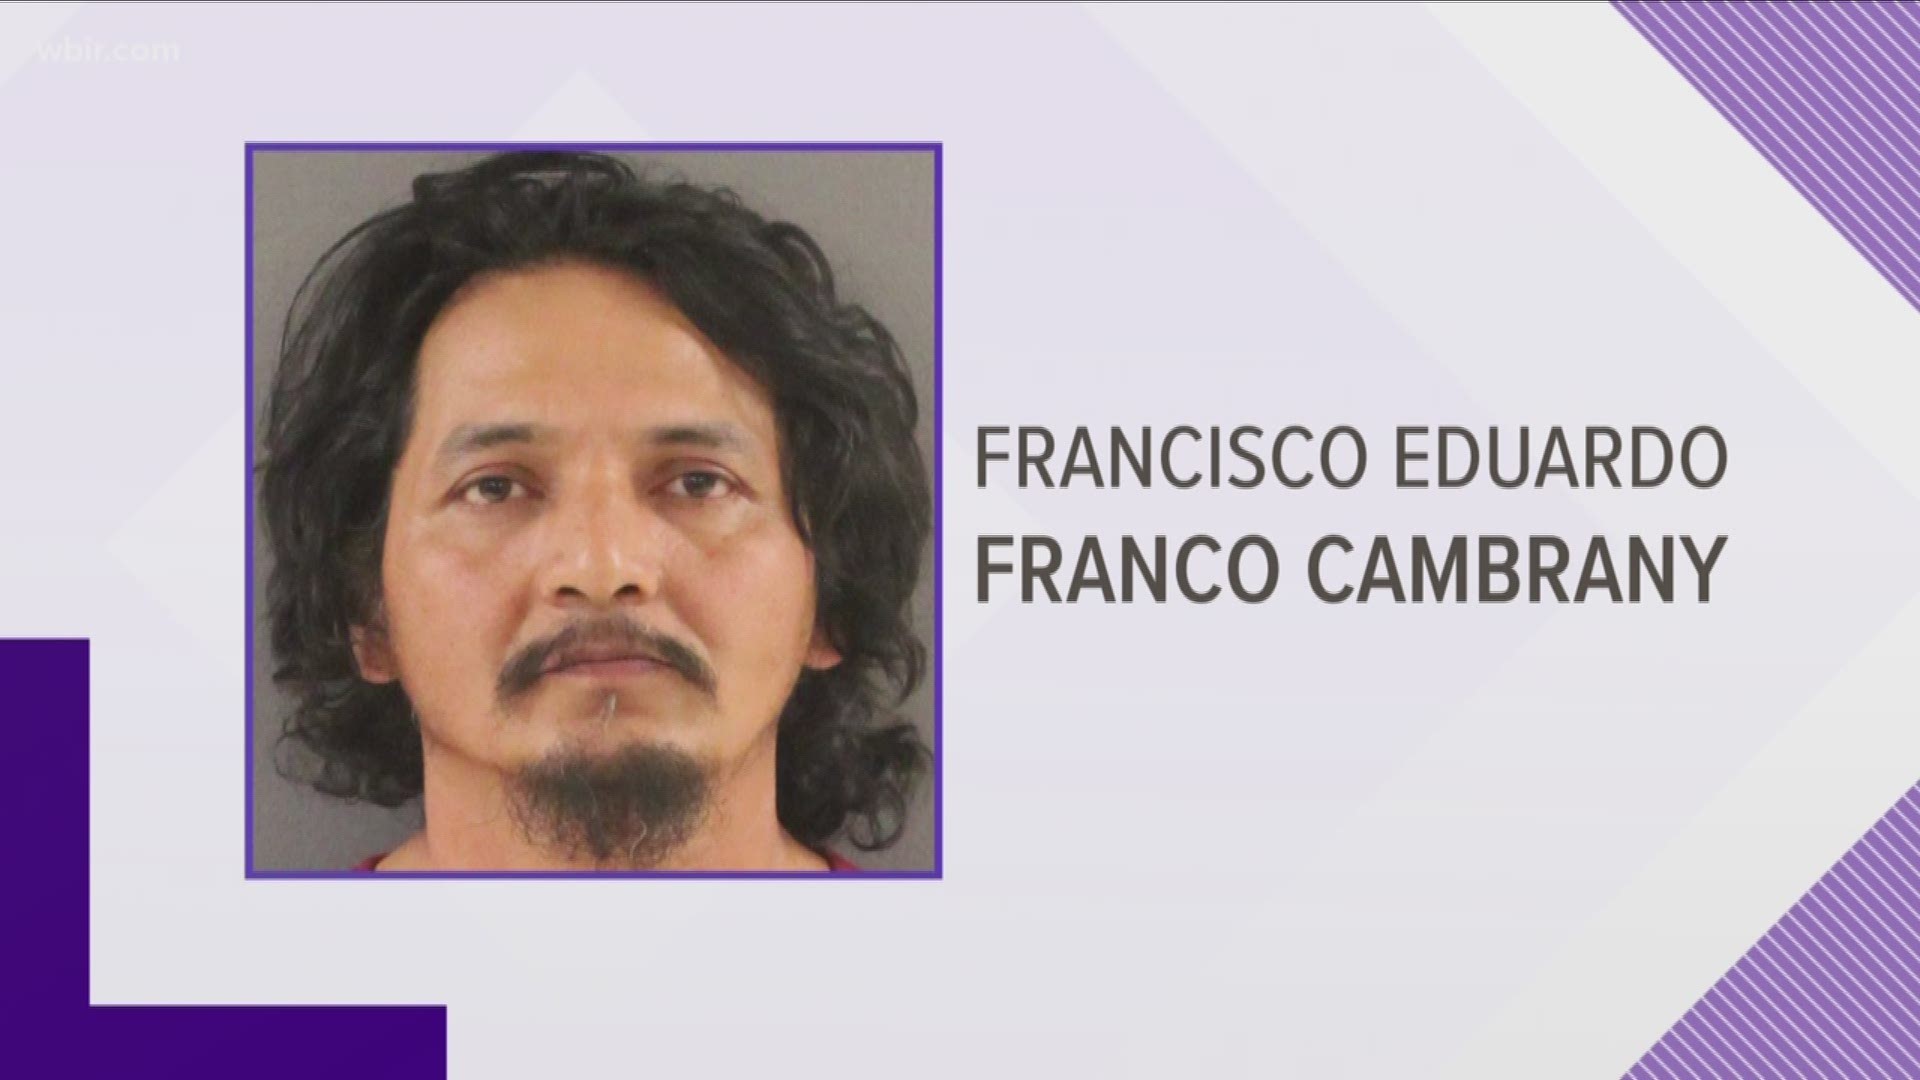 The Knox County Sheriff's Office says the man charged in a deadly crash on Chapman Highway is now in the custody of federal immigration authorities.